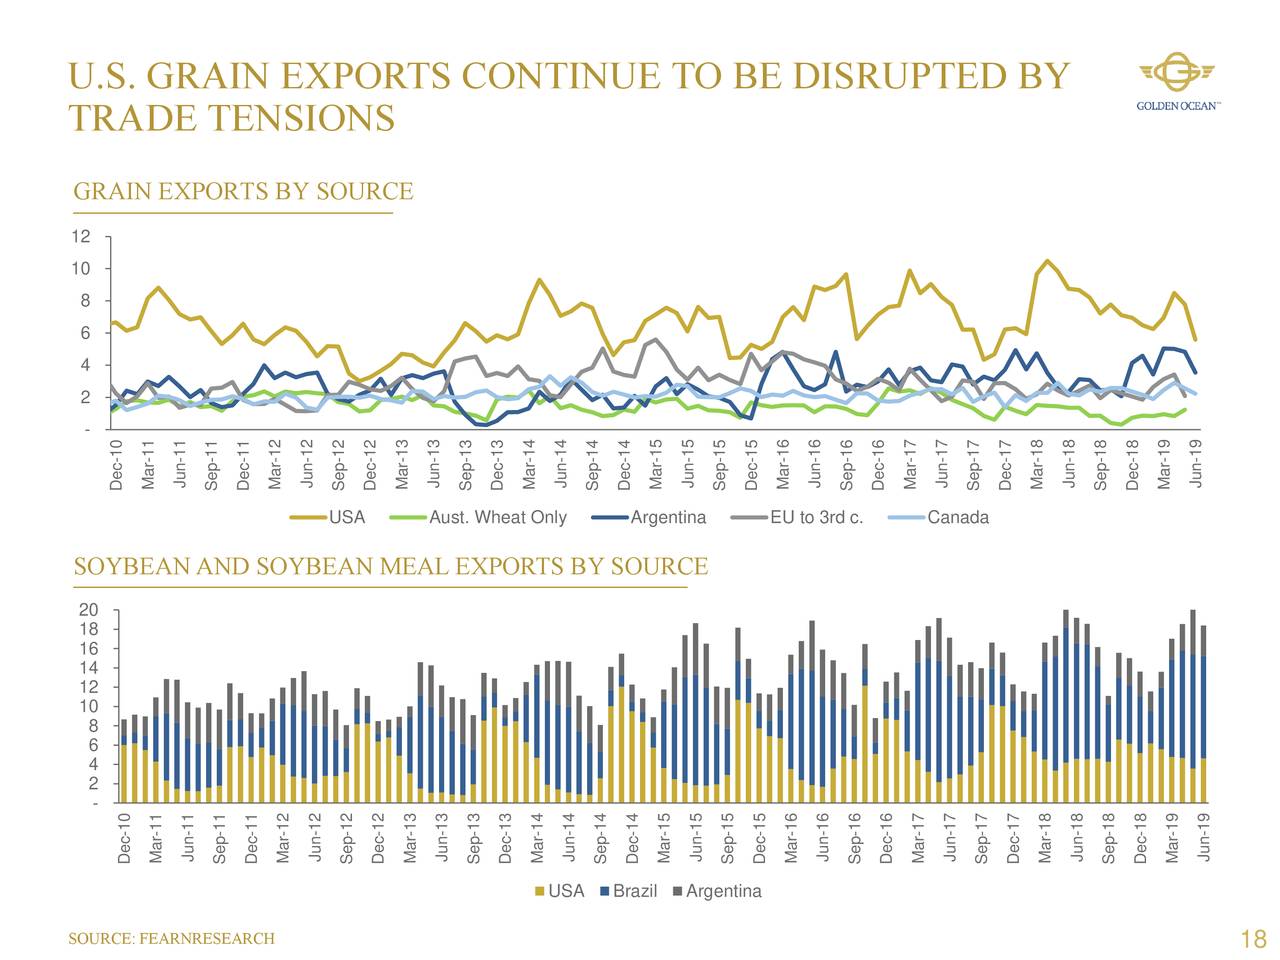 U.S. GRAIN EXPORTS CONTINUE TO BE DISRUPTED BY